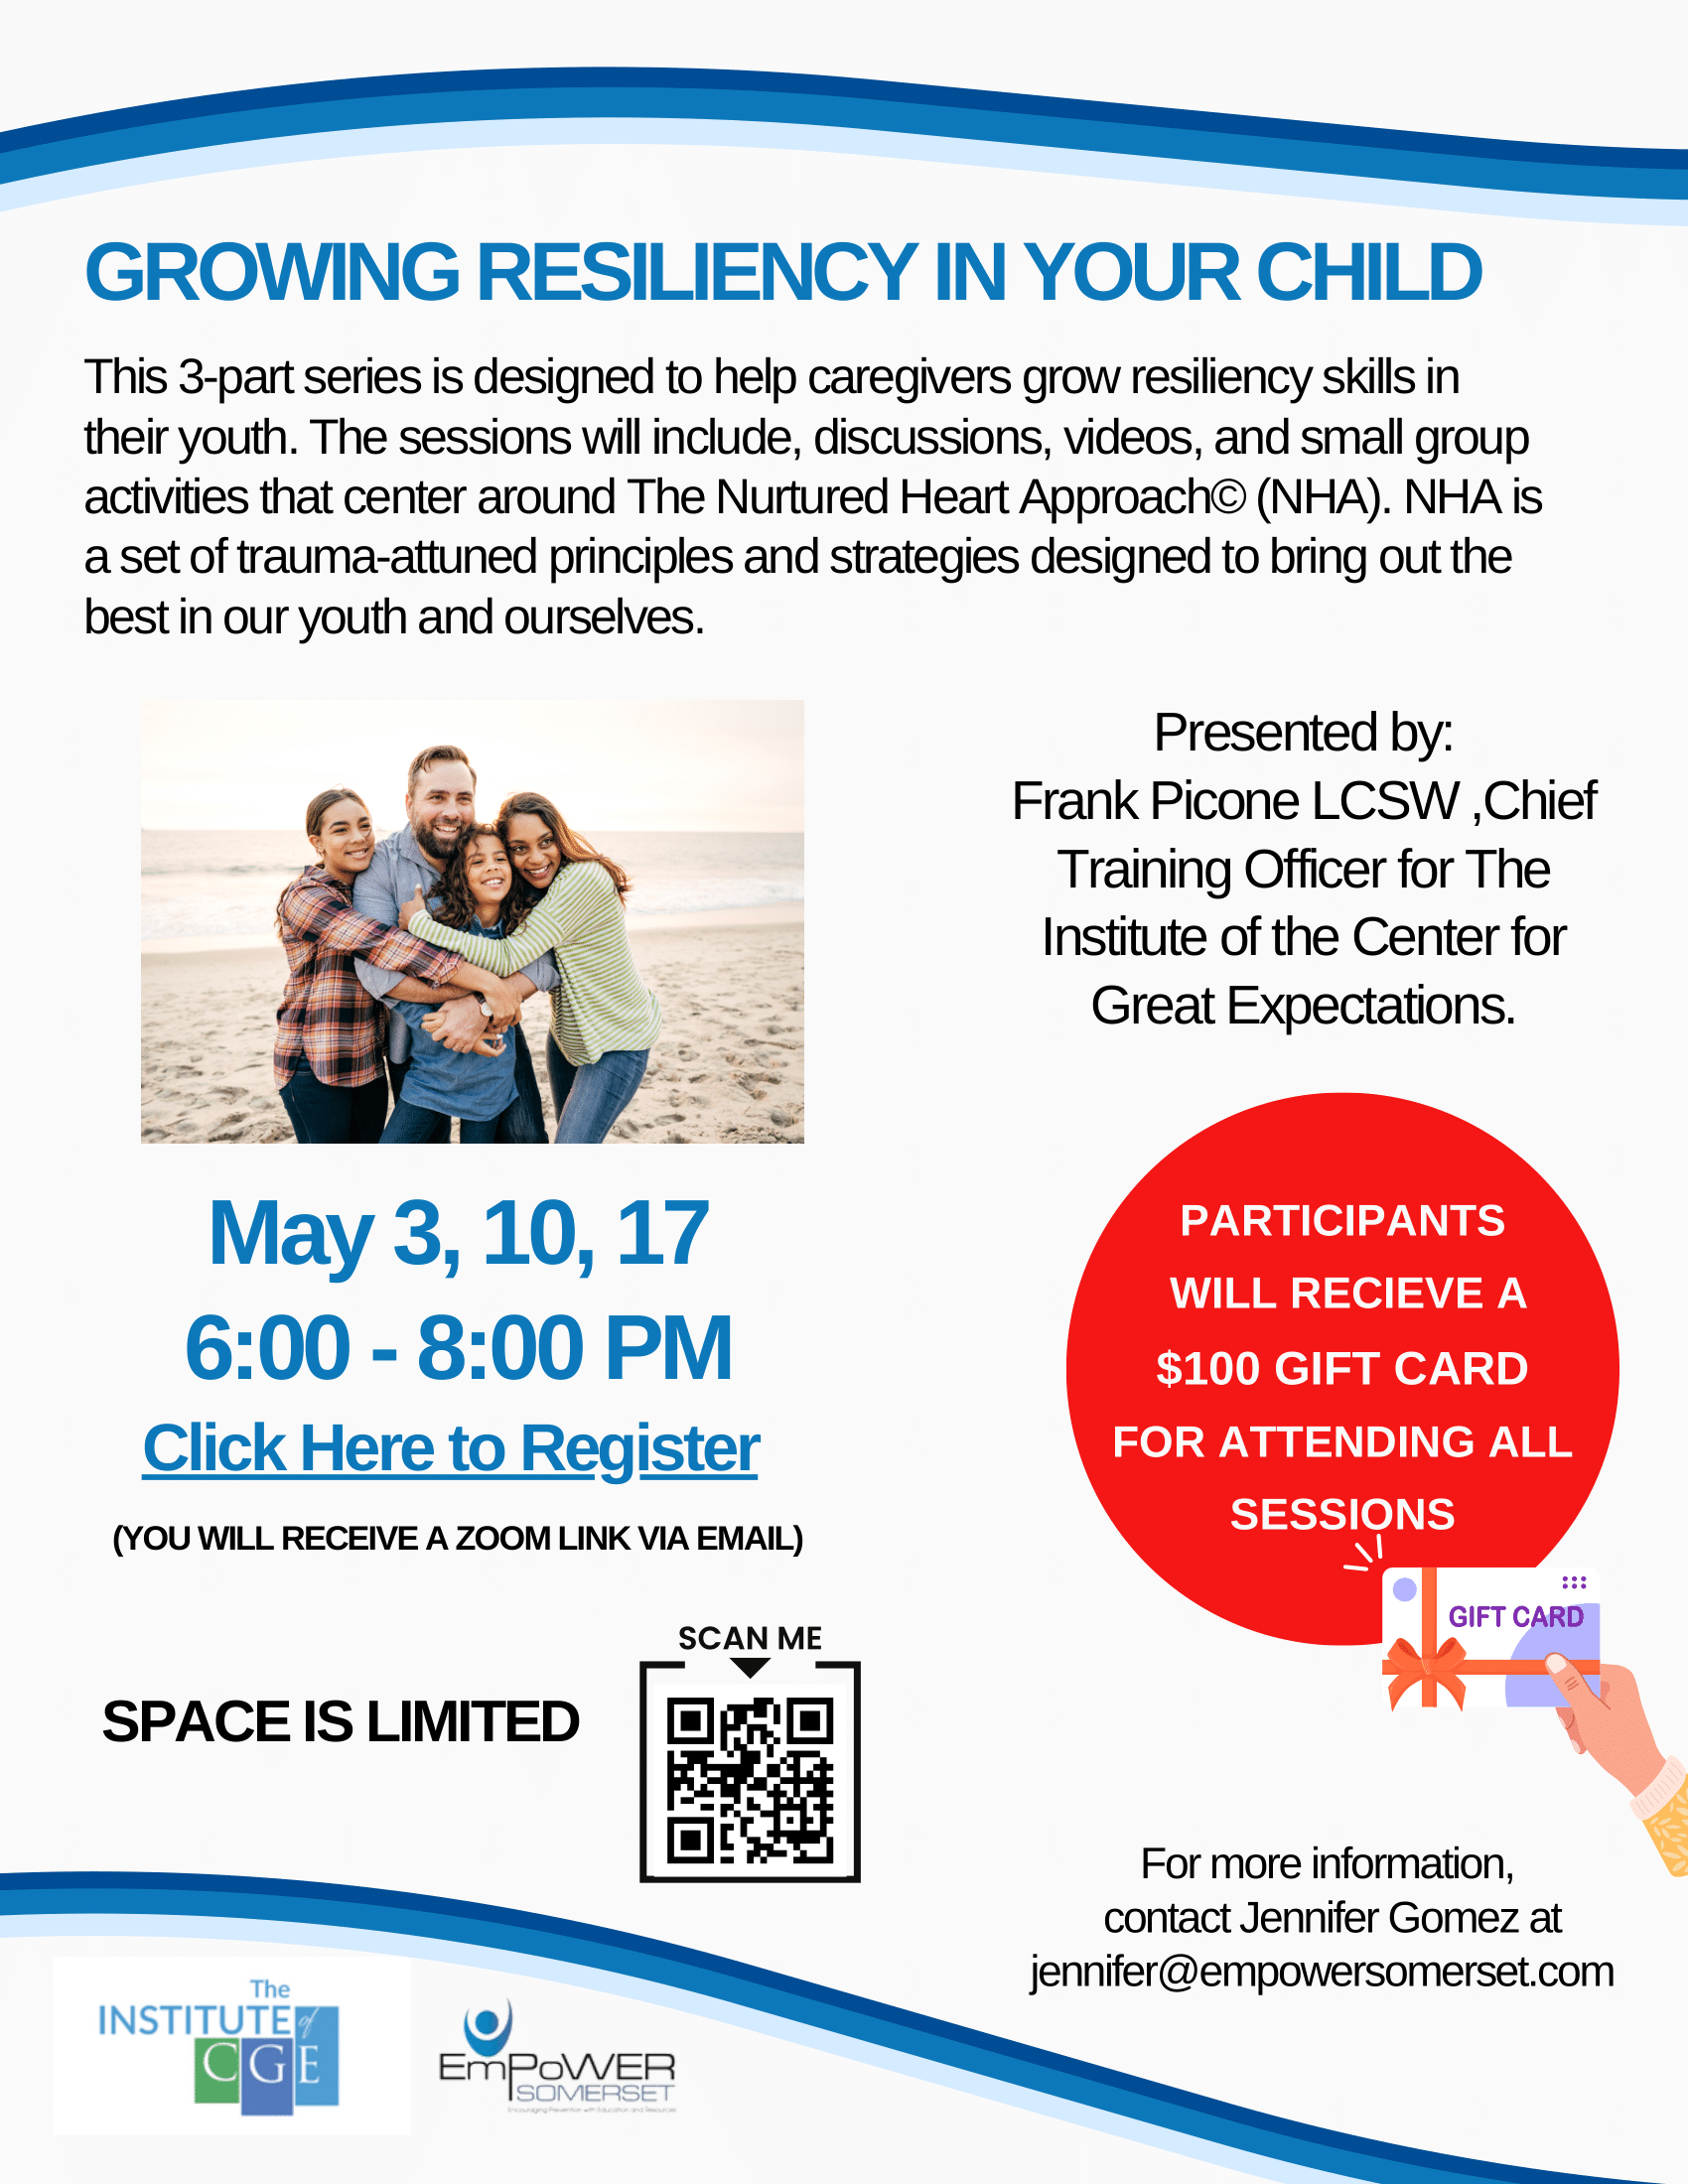 Growing Resiliency in Your Child flyer w QR code 1